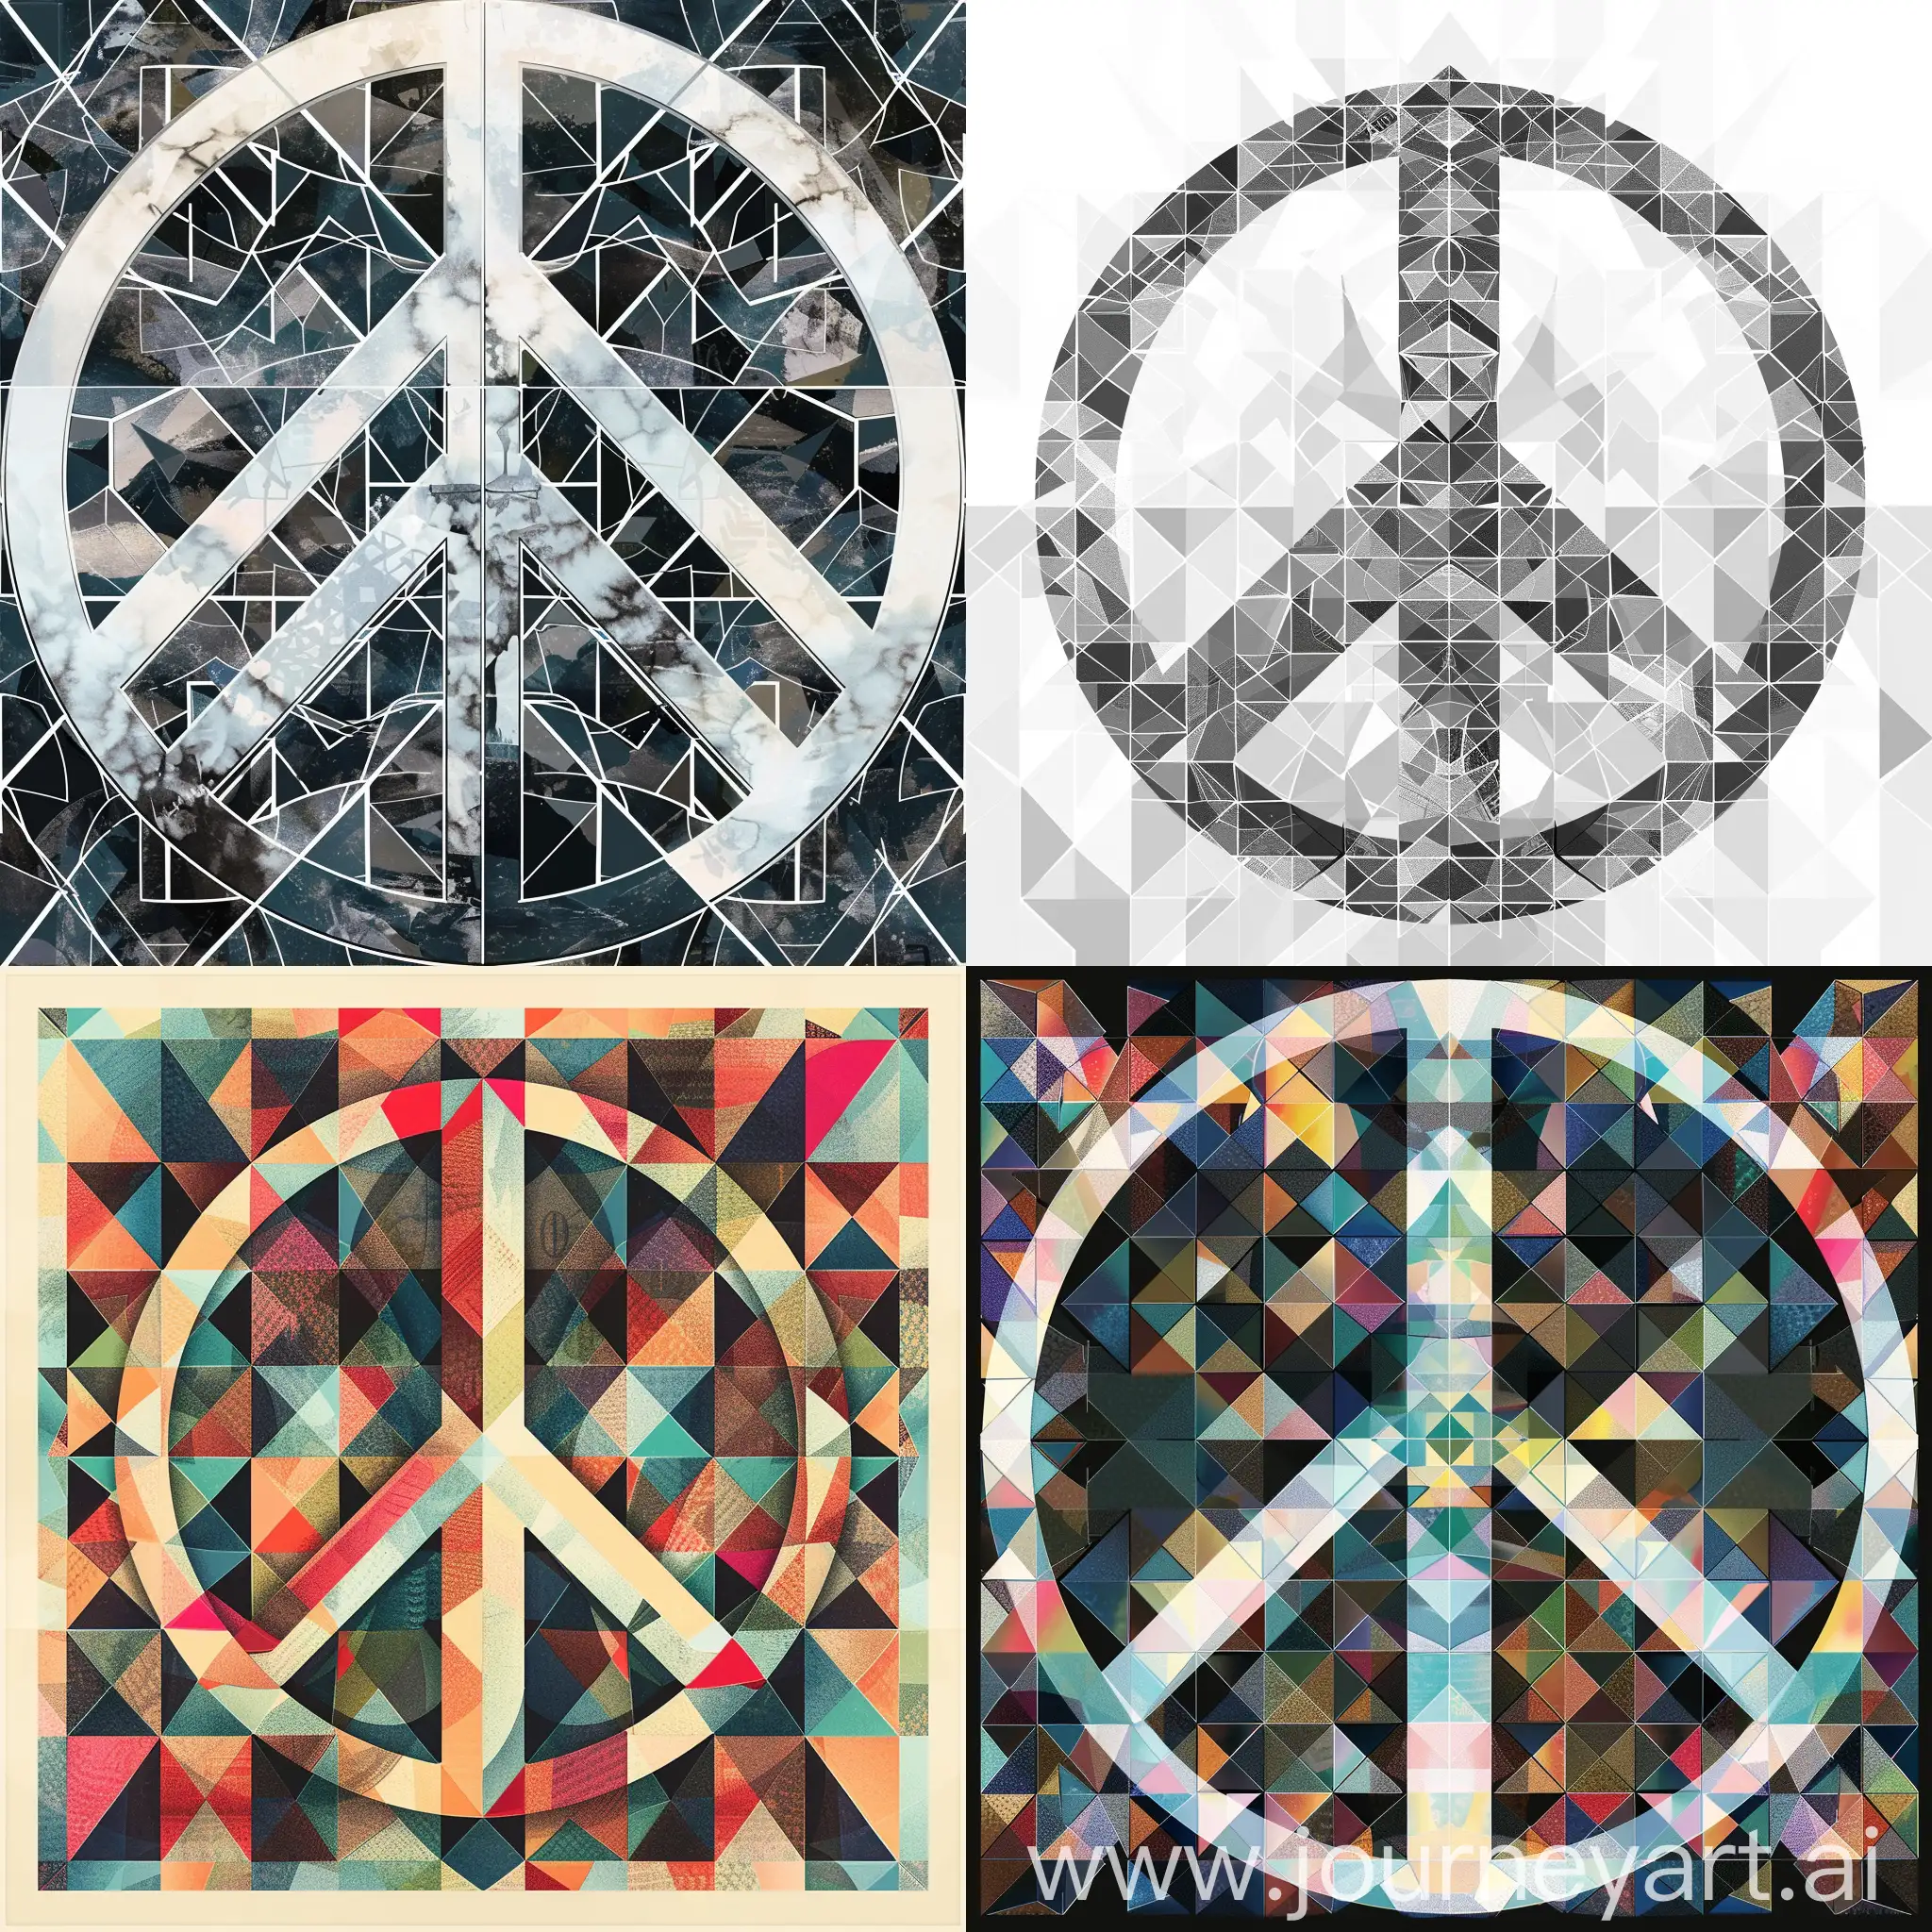 Create geometric patterns using the peace symbol, the patterns should be suitable to use for a banknote design.